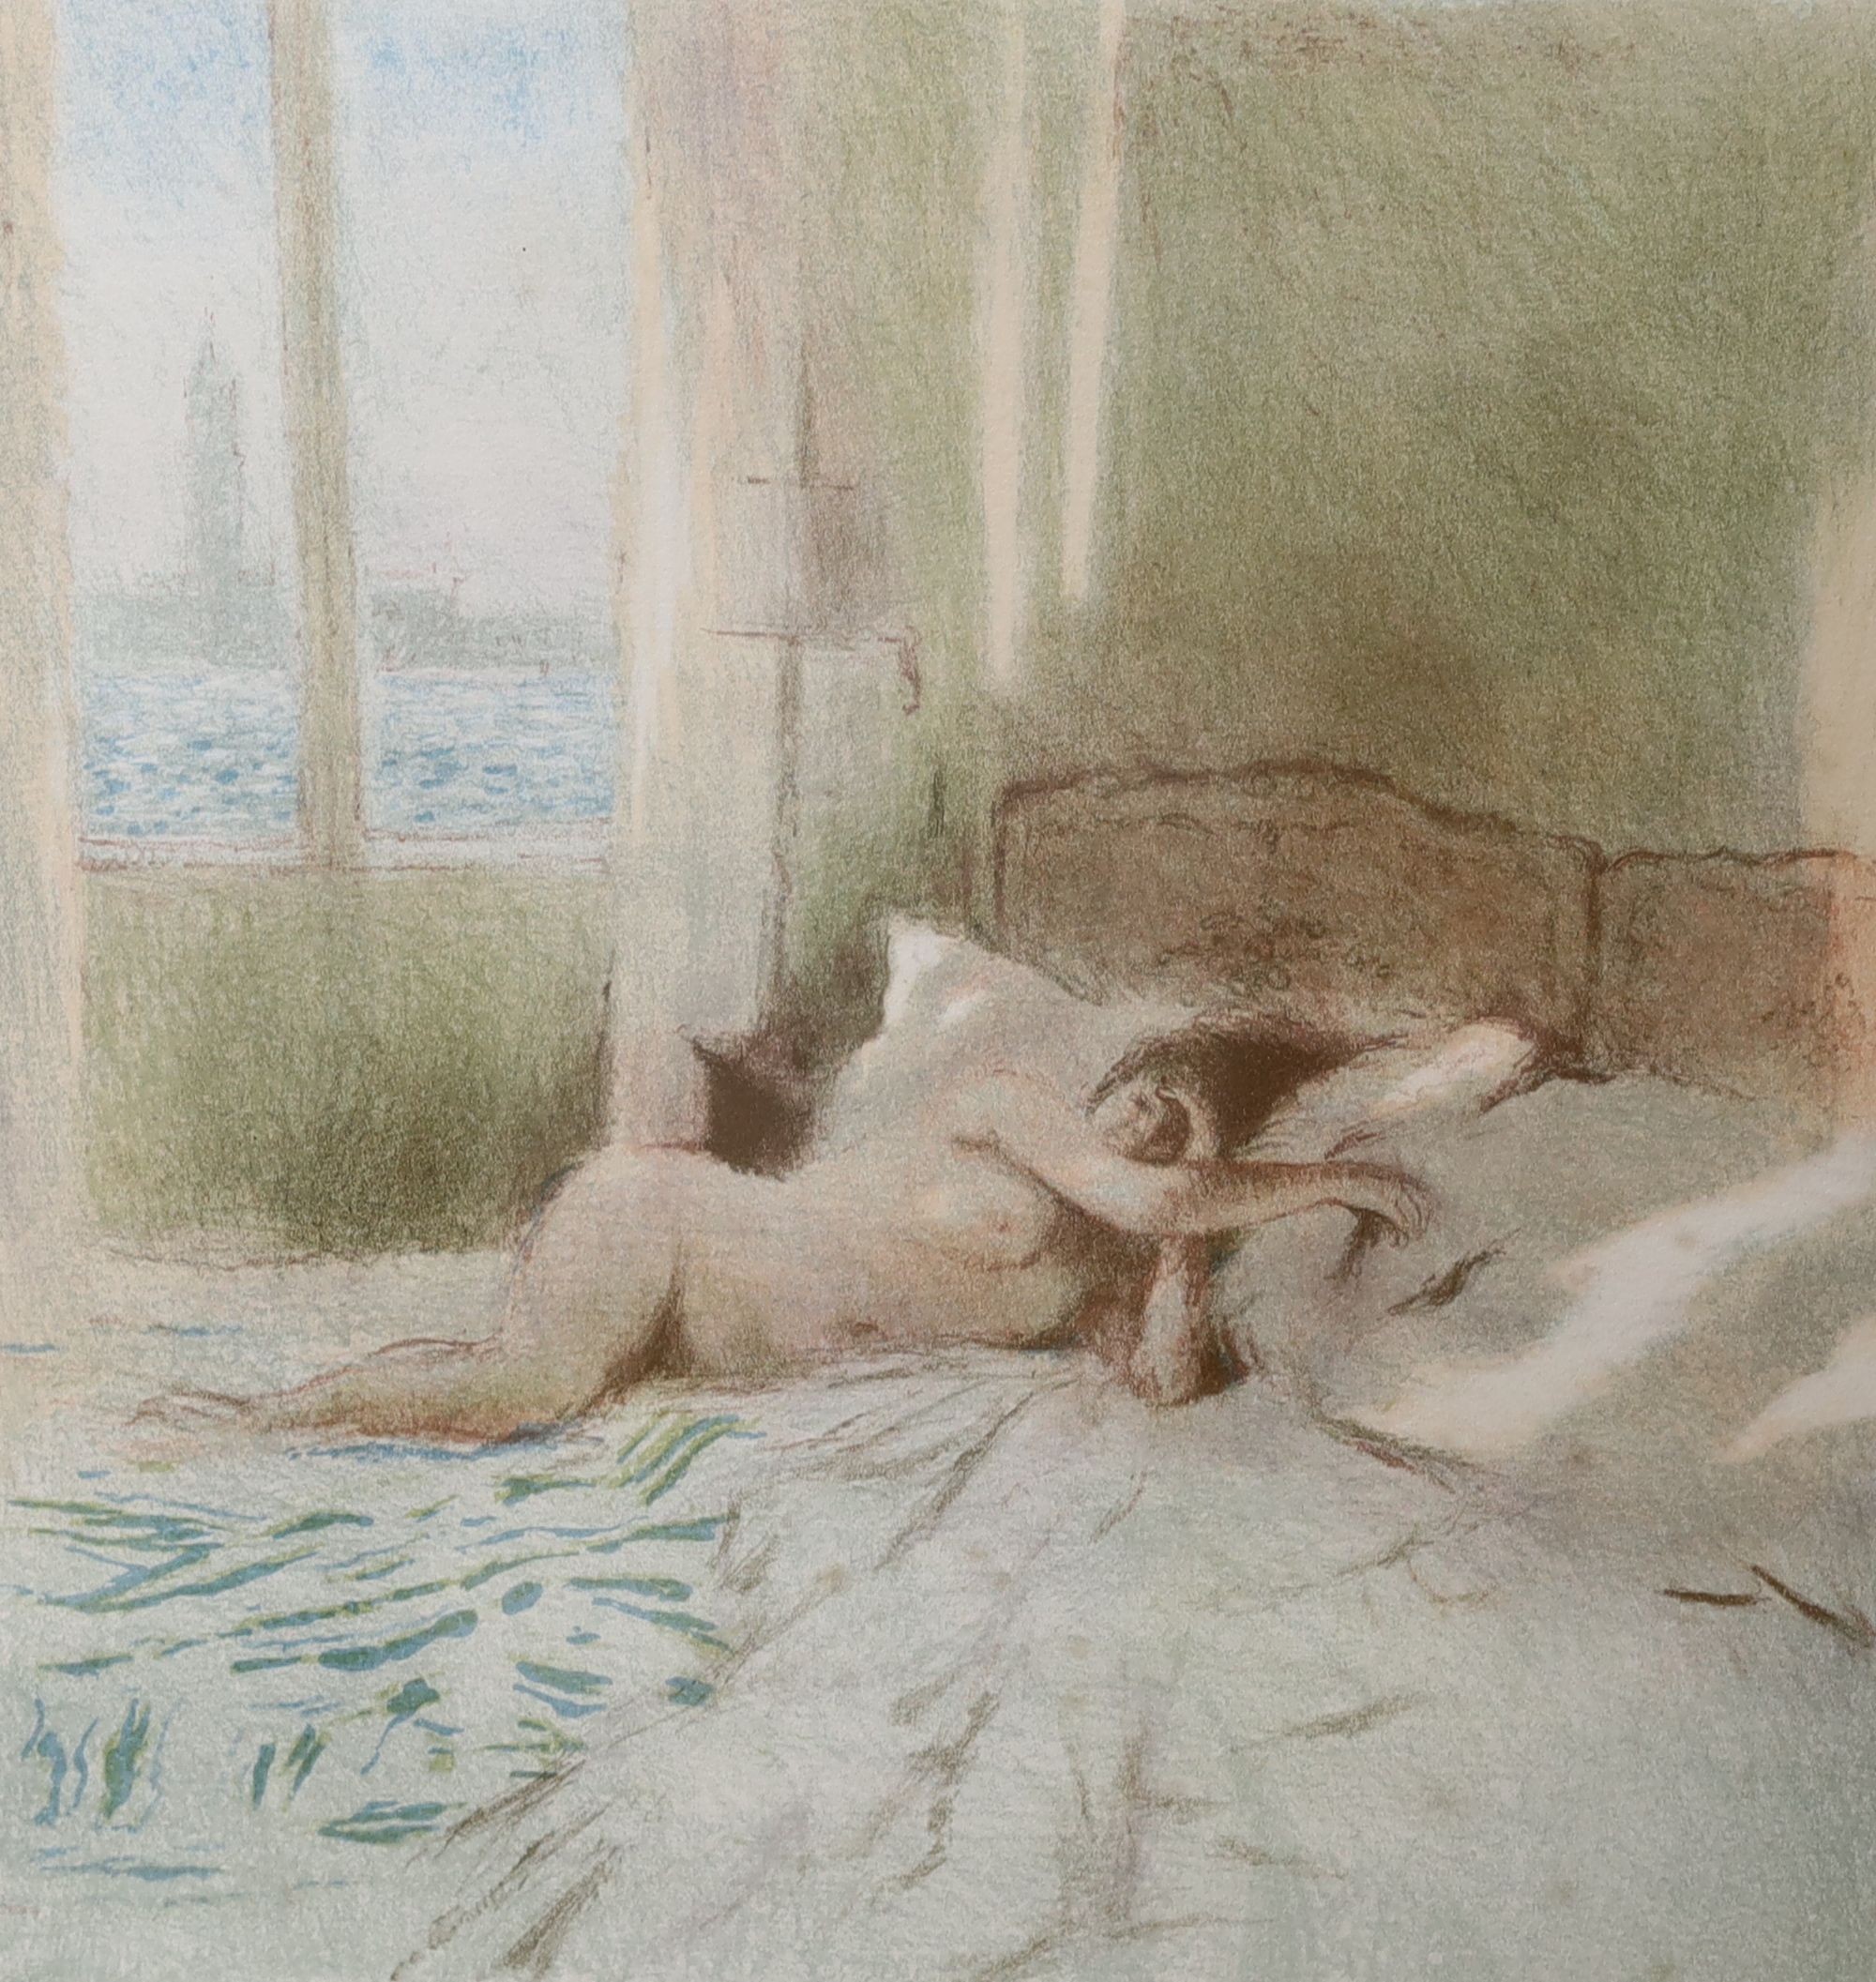 Bernard Dunstan (1920-2017), limited edition print, Reclining nude with Venice beyond, signed in pencil, 169/195, 38 x 35cm